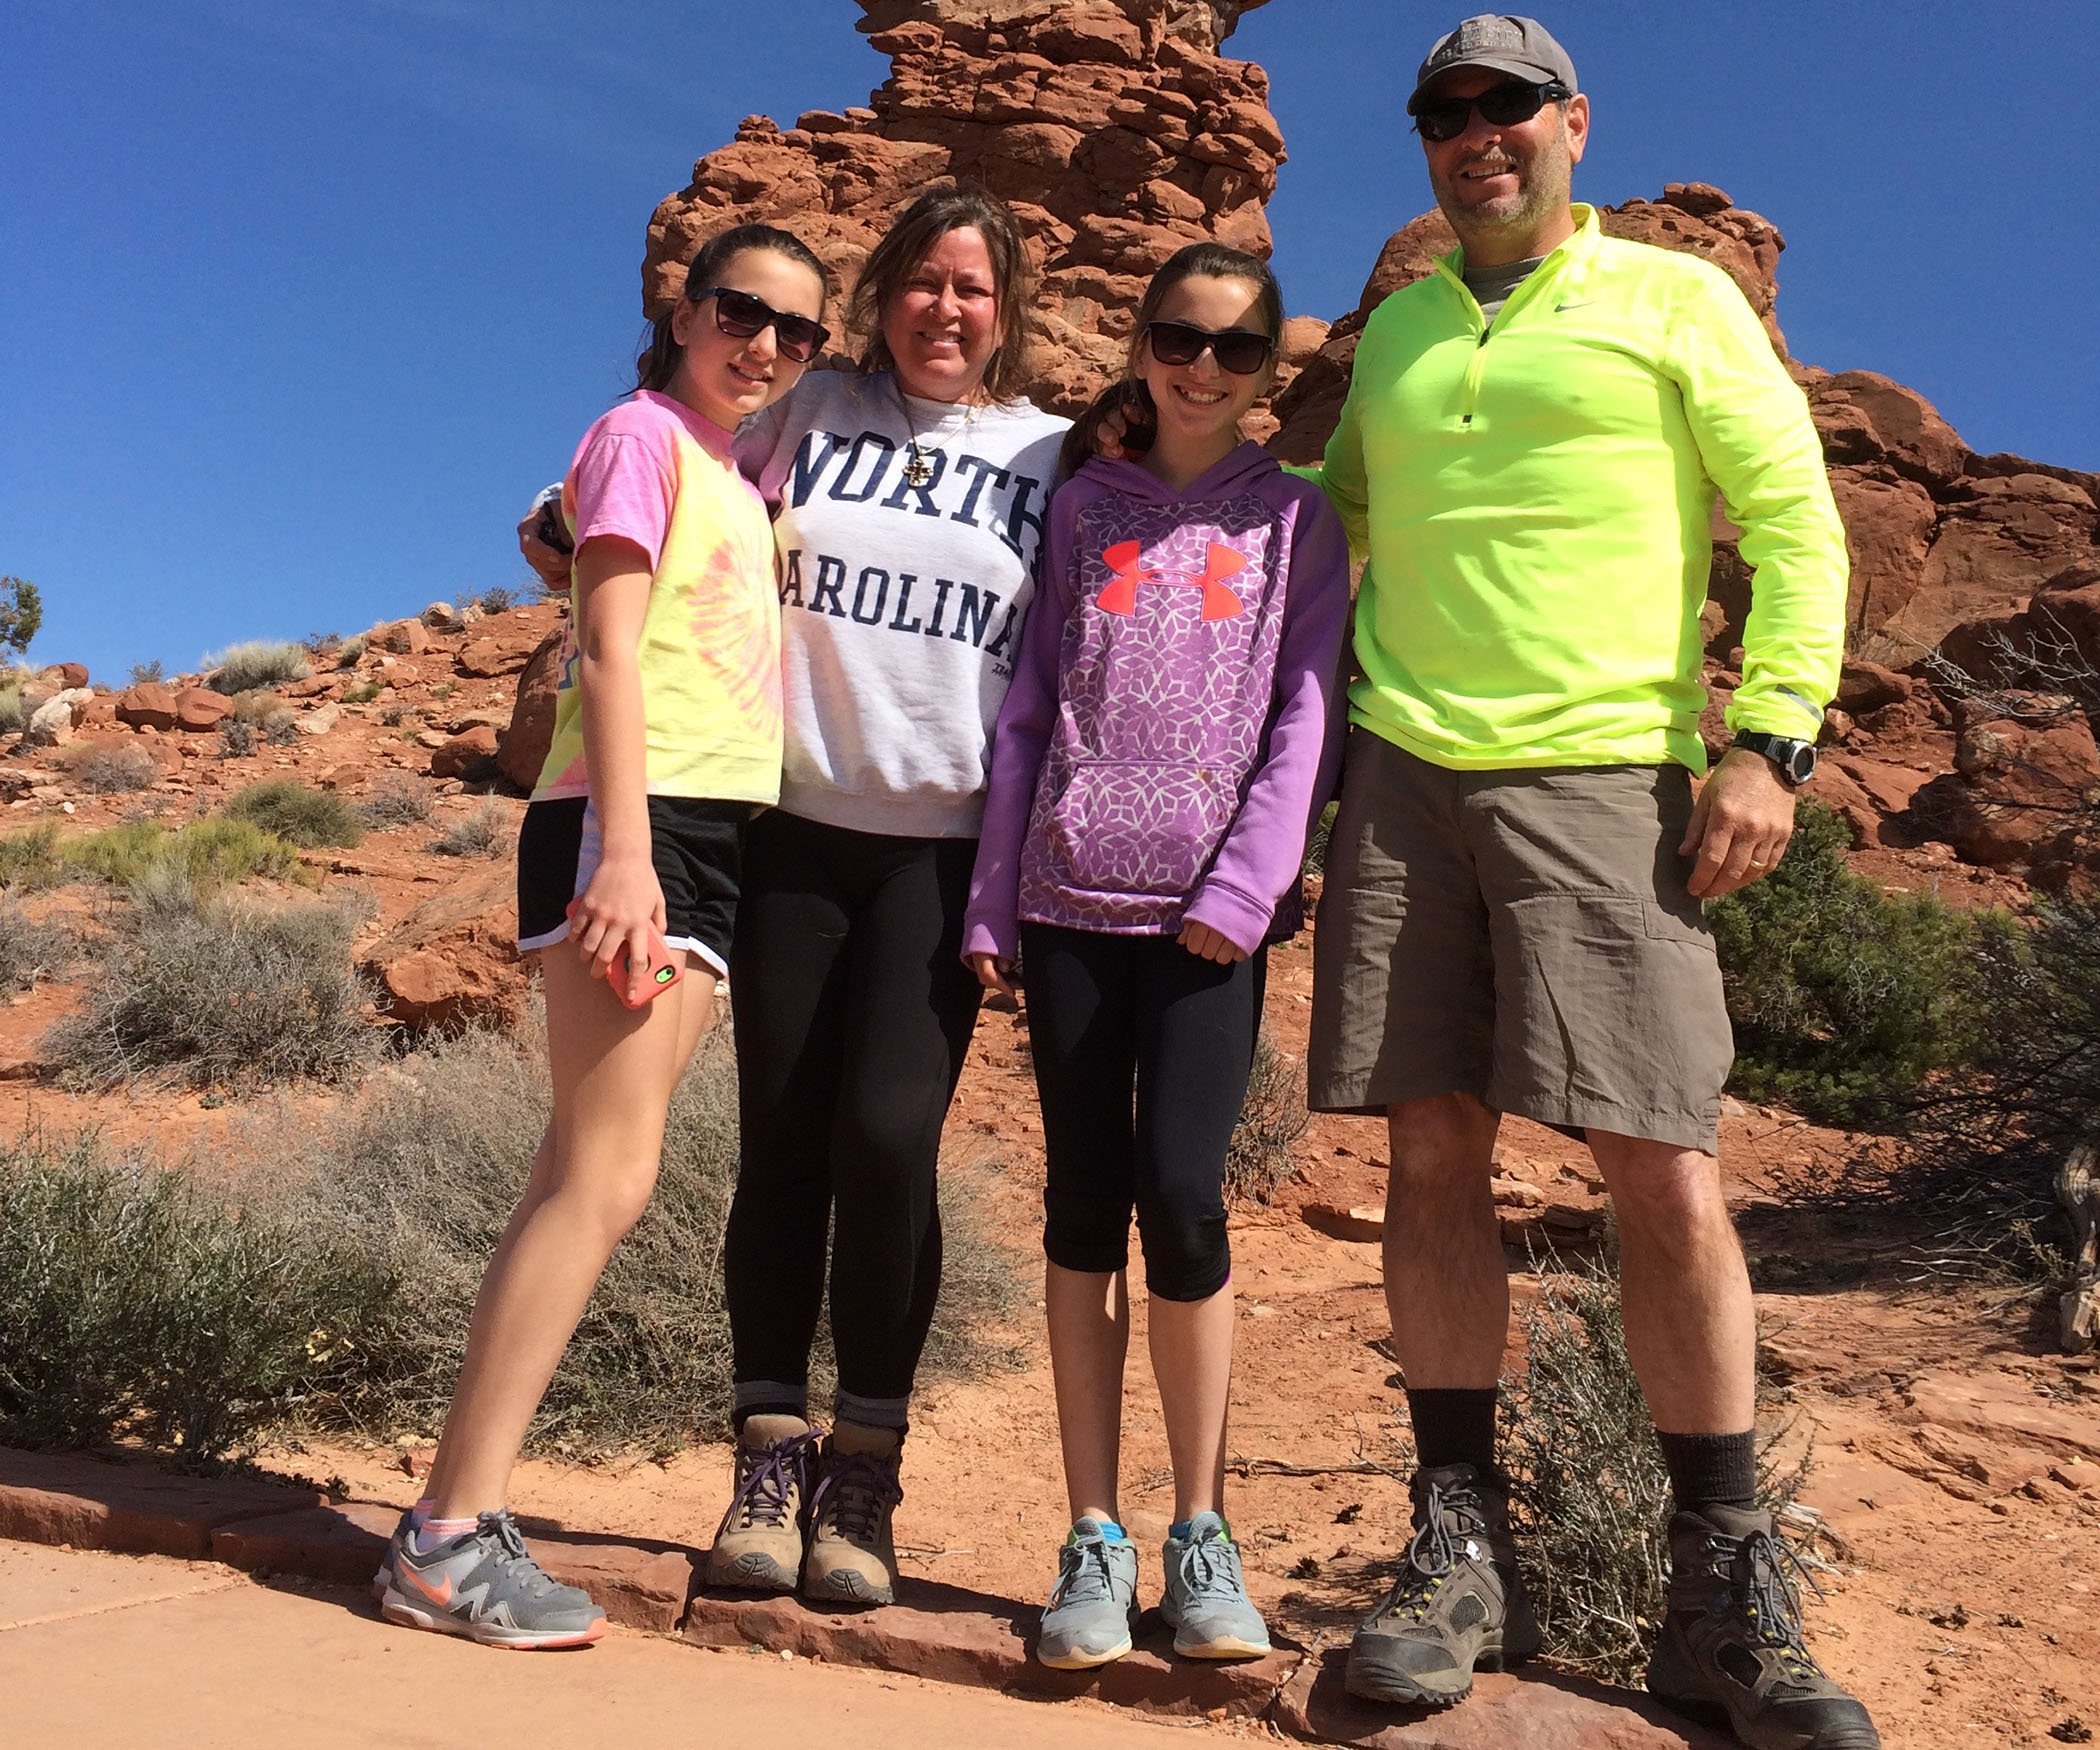 Greg Loftin, our ServiceNow expert enjoying the outdoors with his family in Denver.